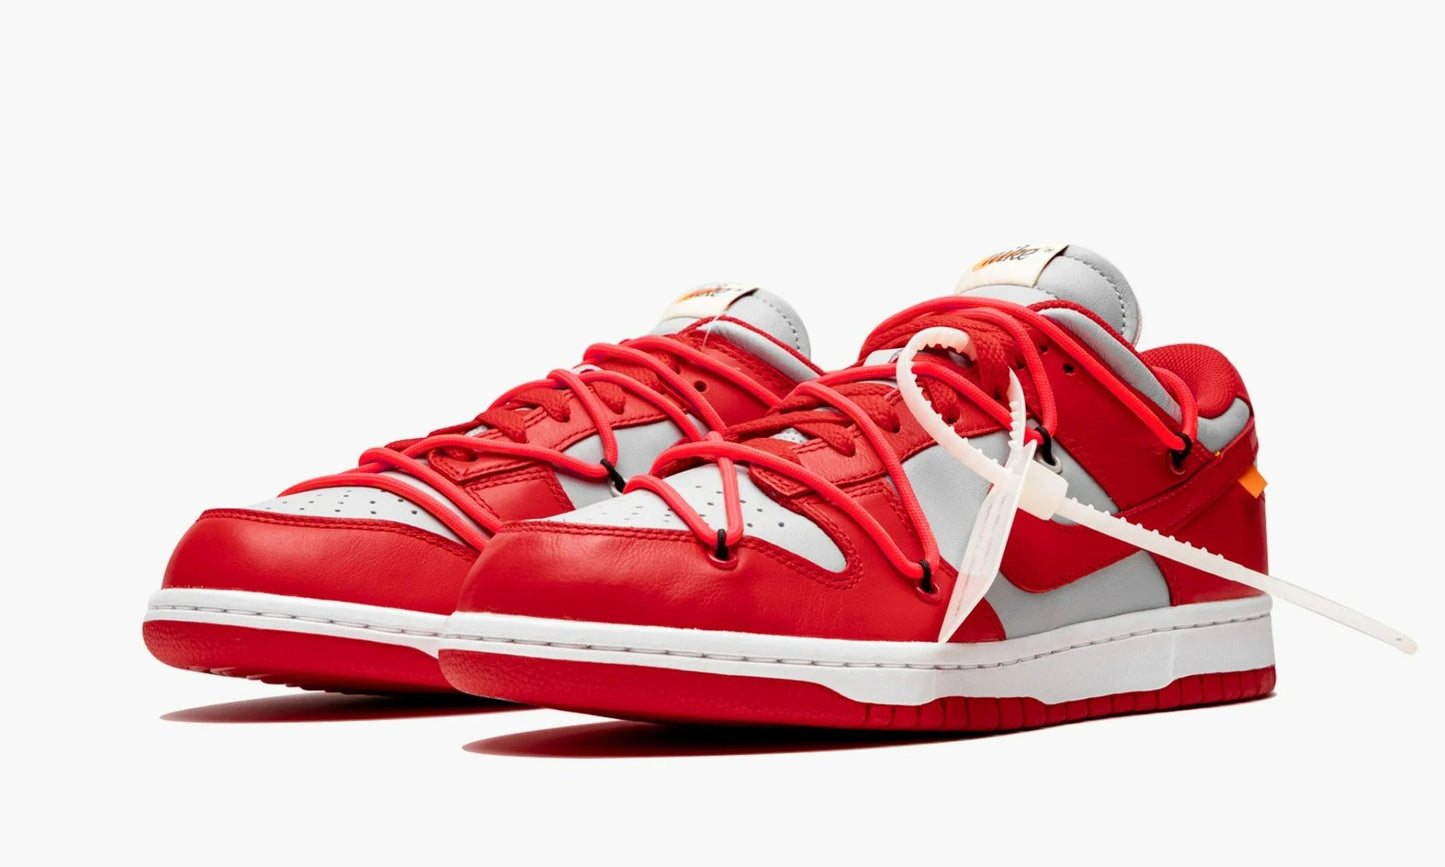 Dunk Low Off-White University Red - CT0856 600 